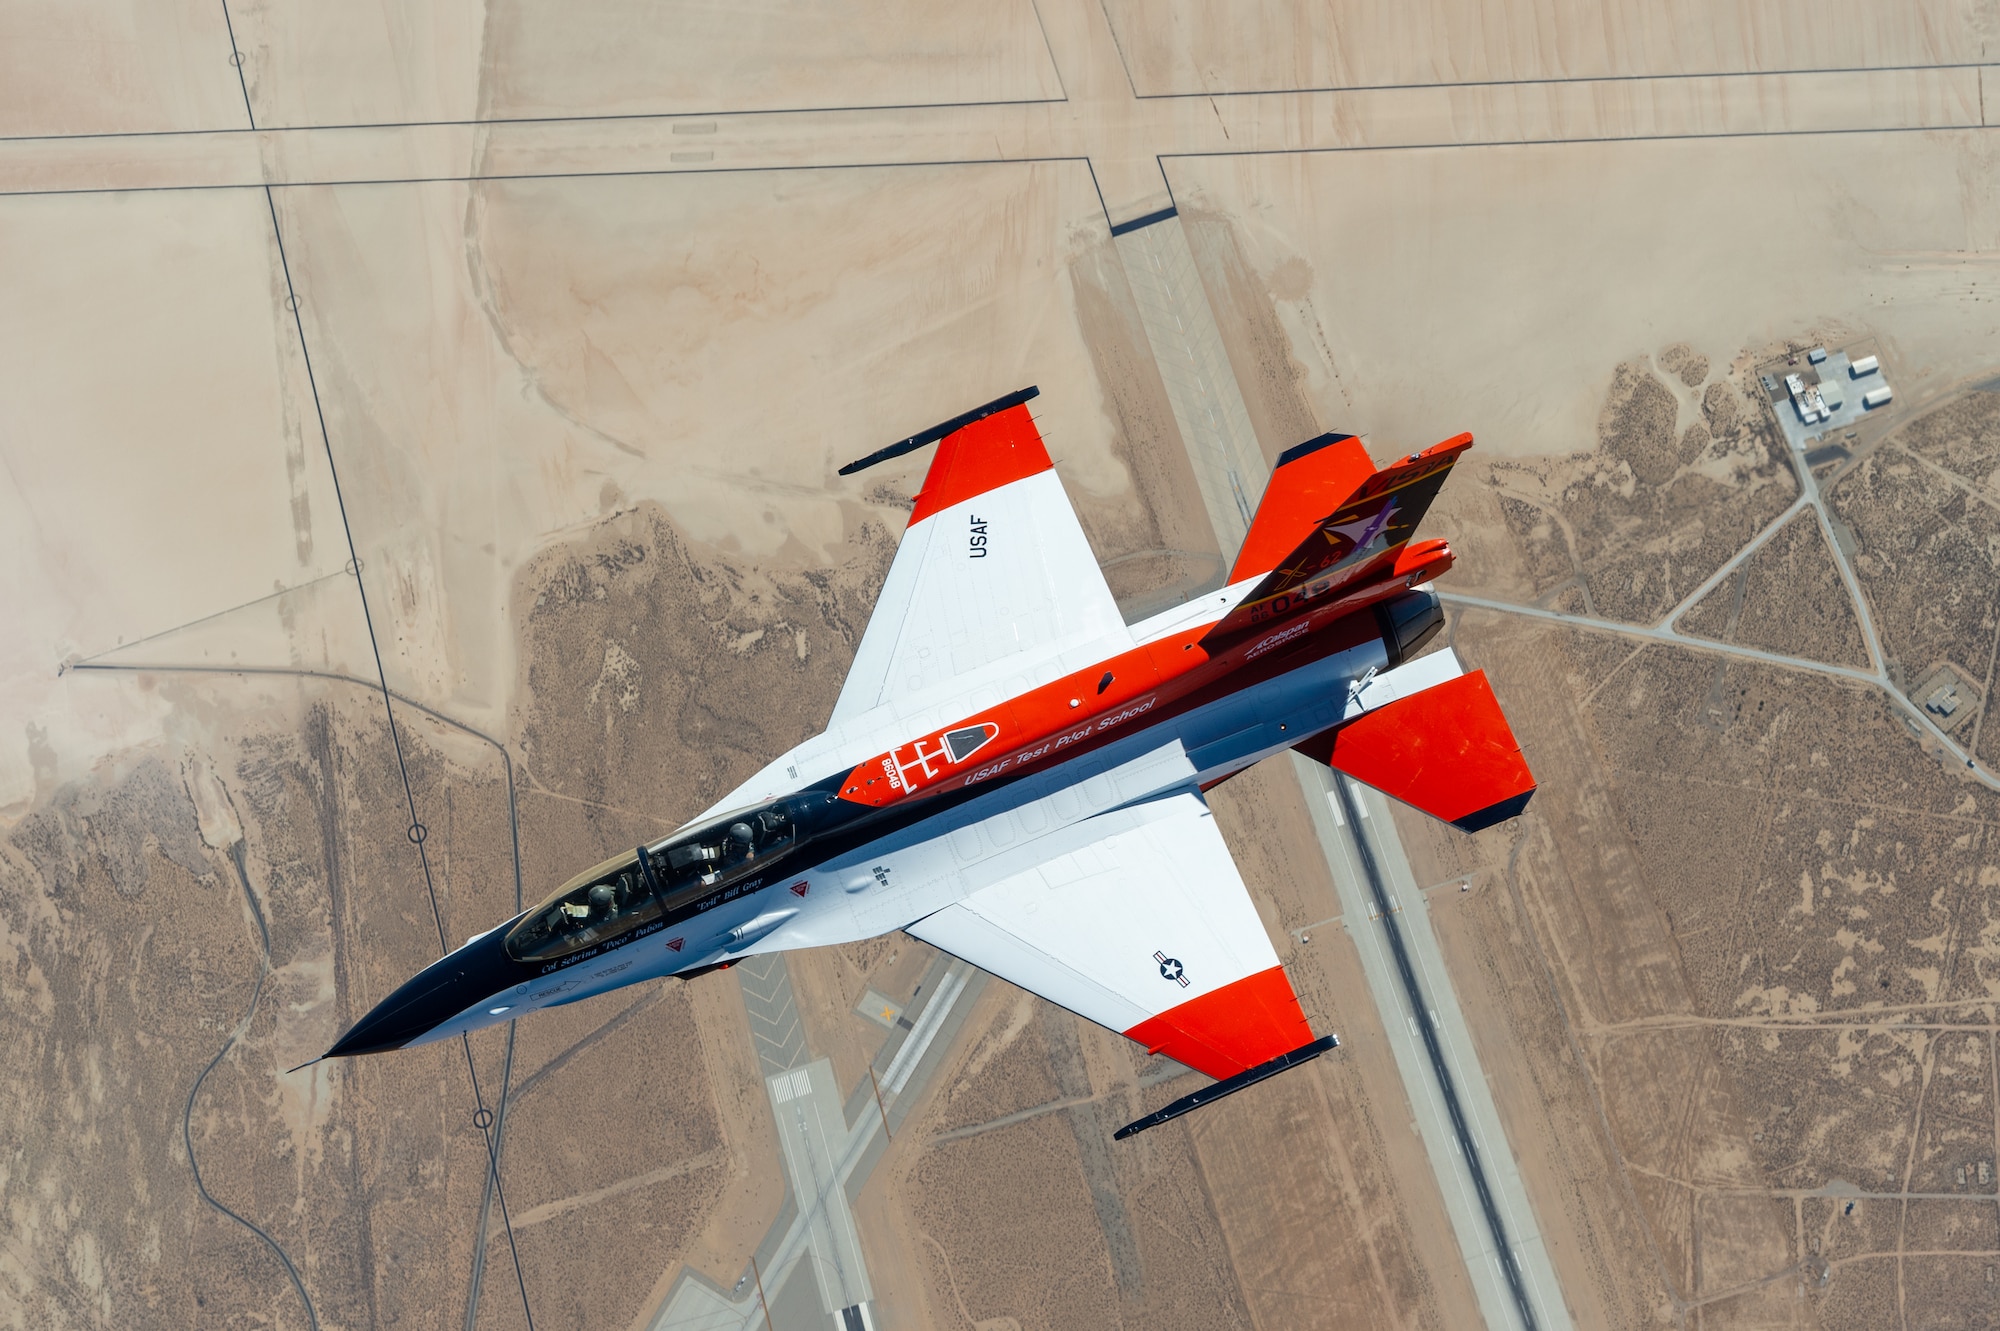 The X-62 Variable In-Flight Simulator Test Aircraft (VISTA) flies in the skies over Edwards Air Force Base, California, Aug. 26, 2022. (Air Force photo by Kyle Brasier)